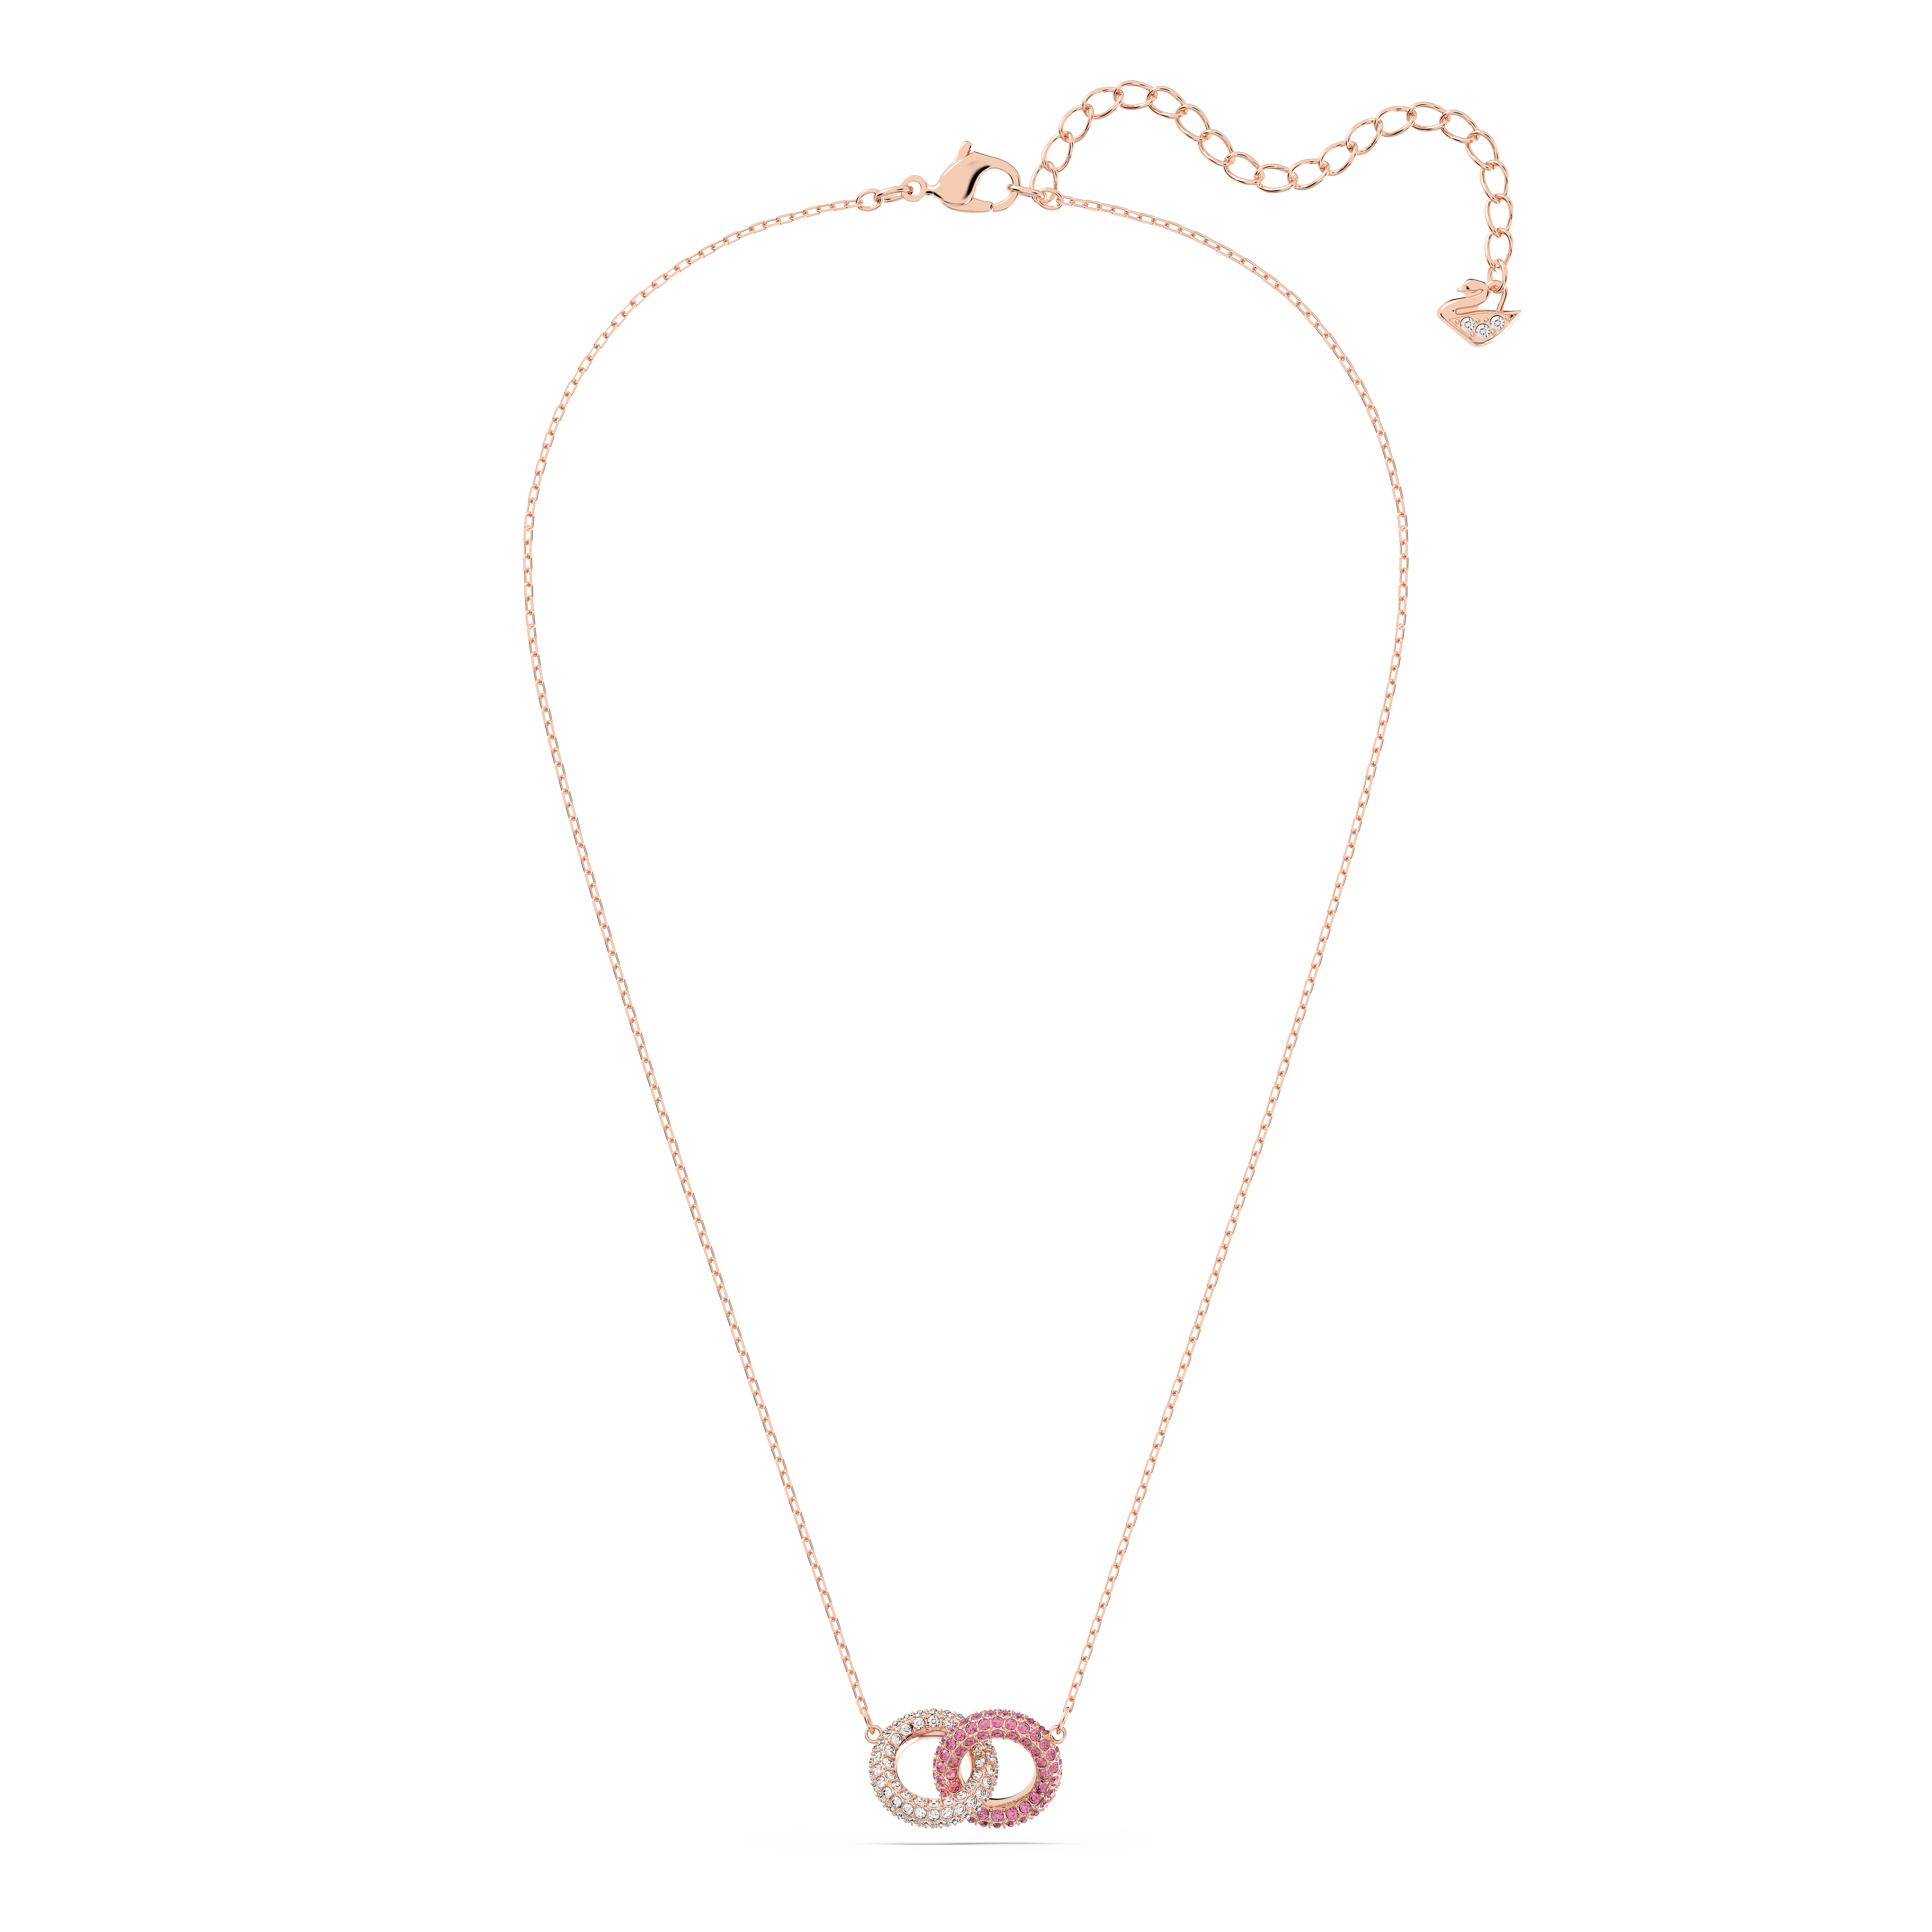 Stone necklace, Intertwined circles, Pink, Rose gold-tone plated by SWAROVSKI